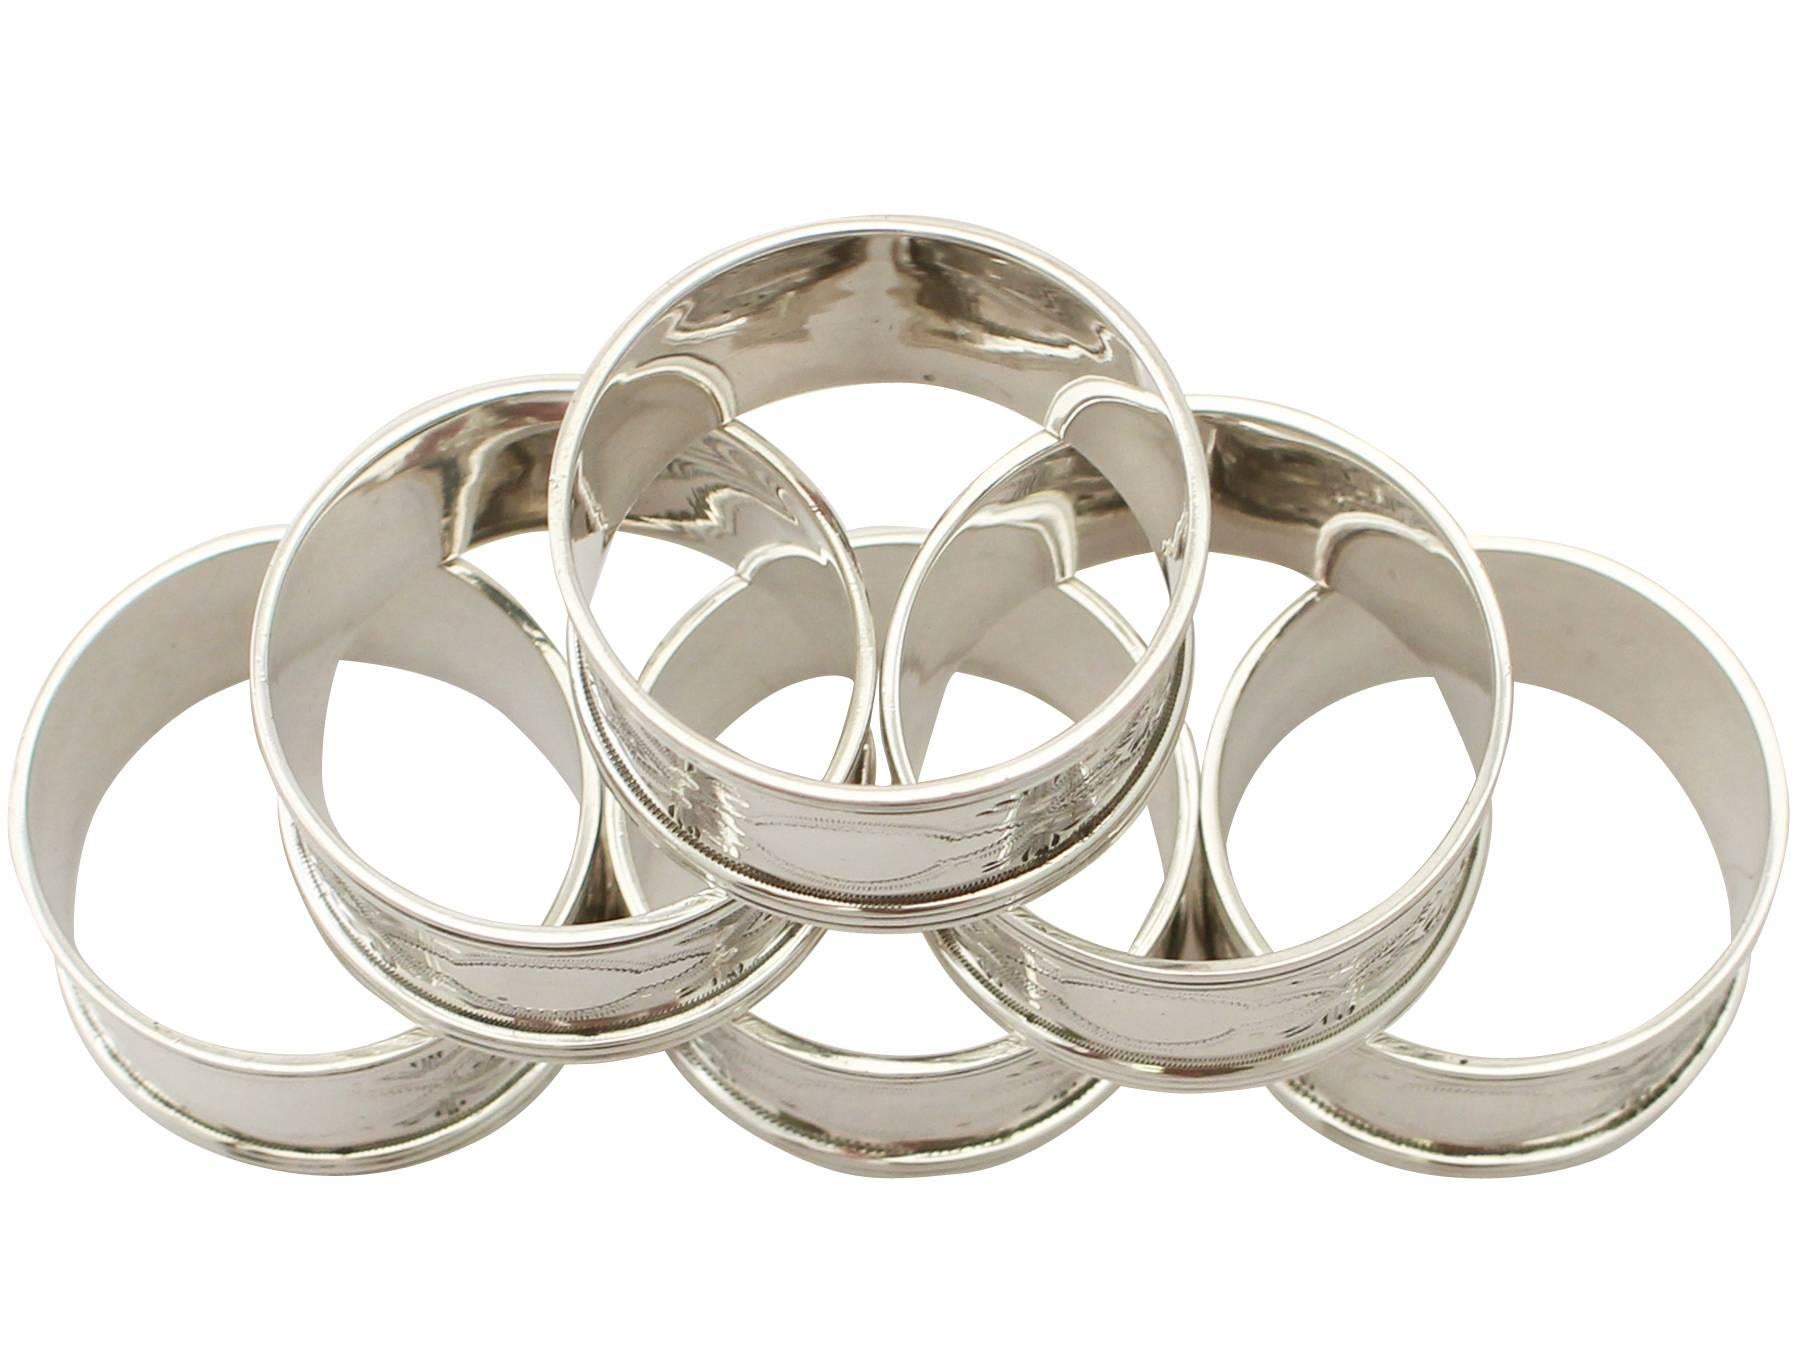 Early 20th Century Sterling Silver Napkin Rings Set of Six, Antique George V